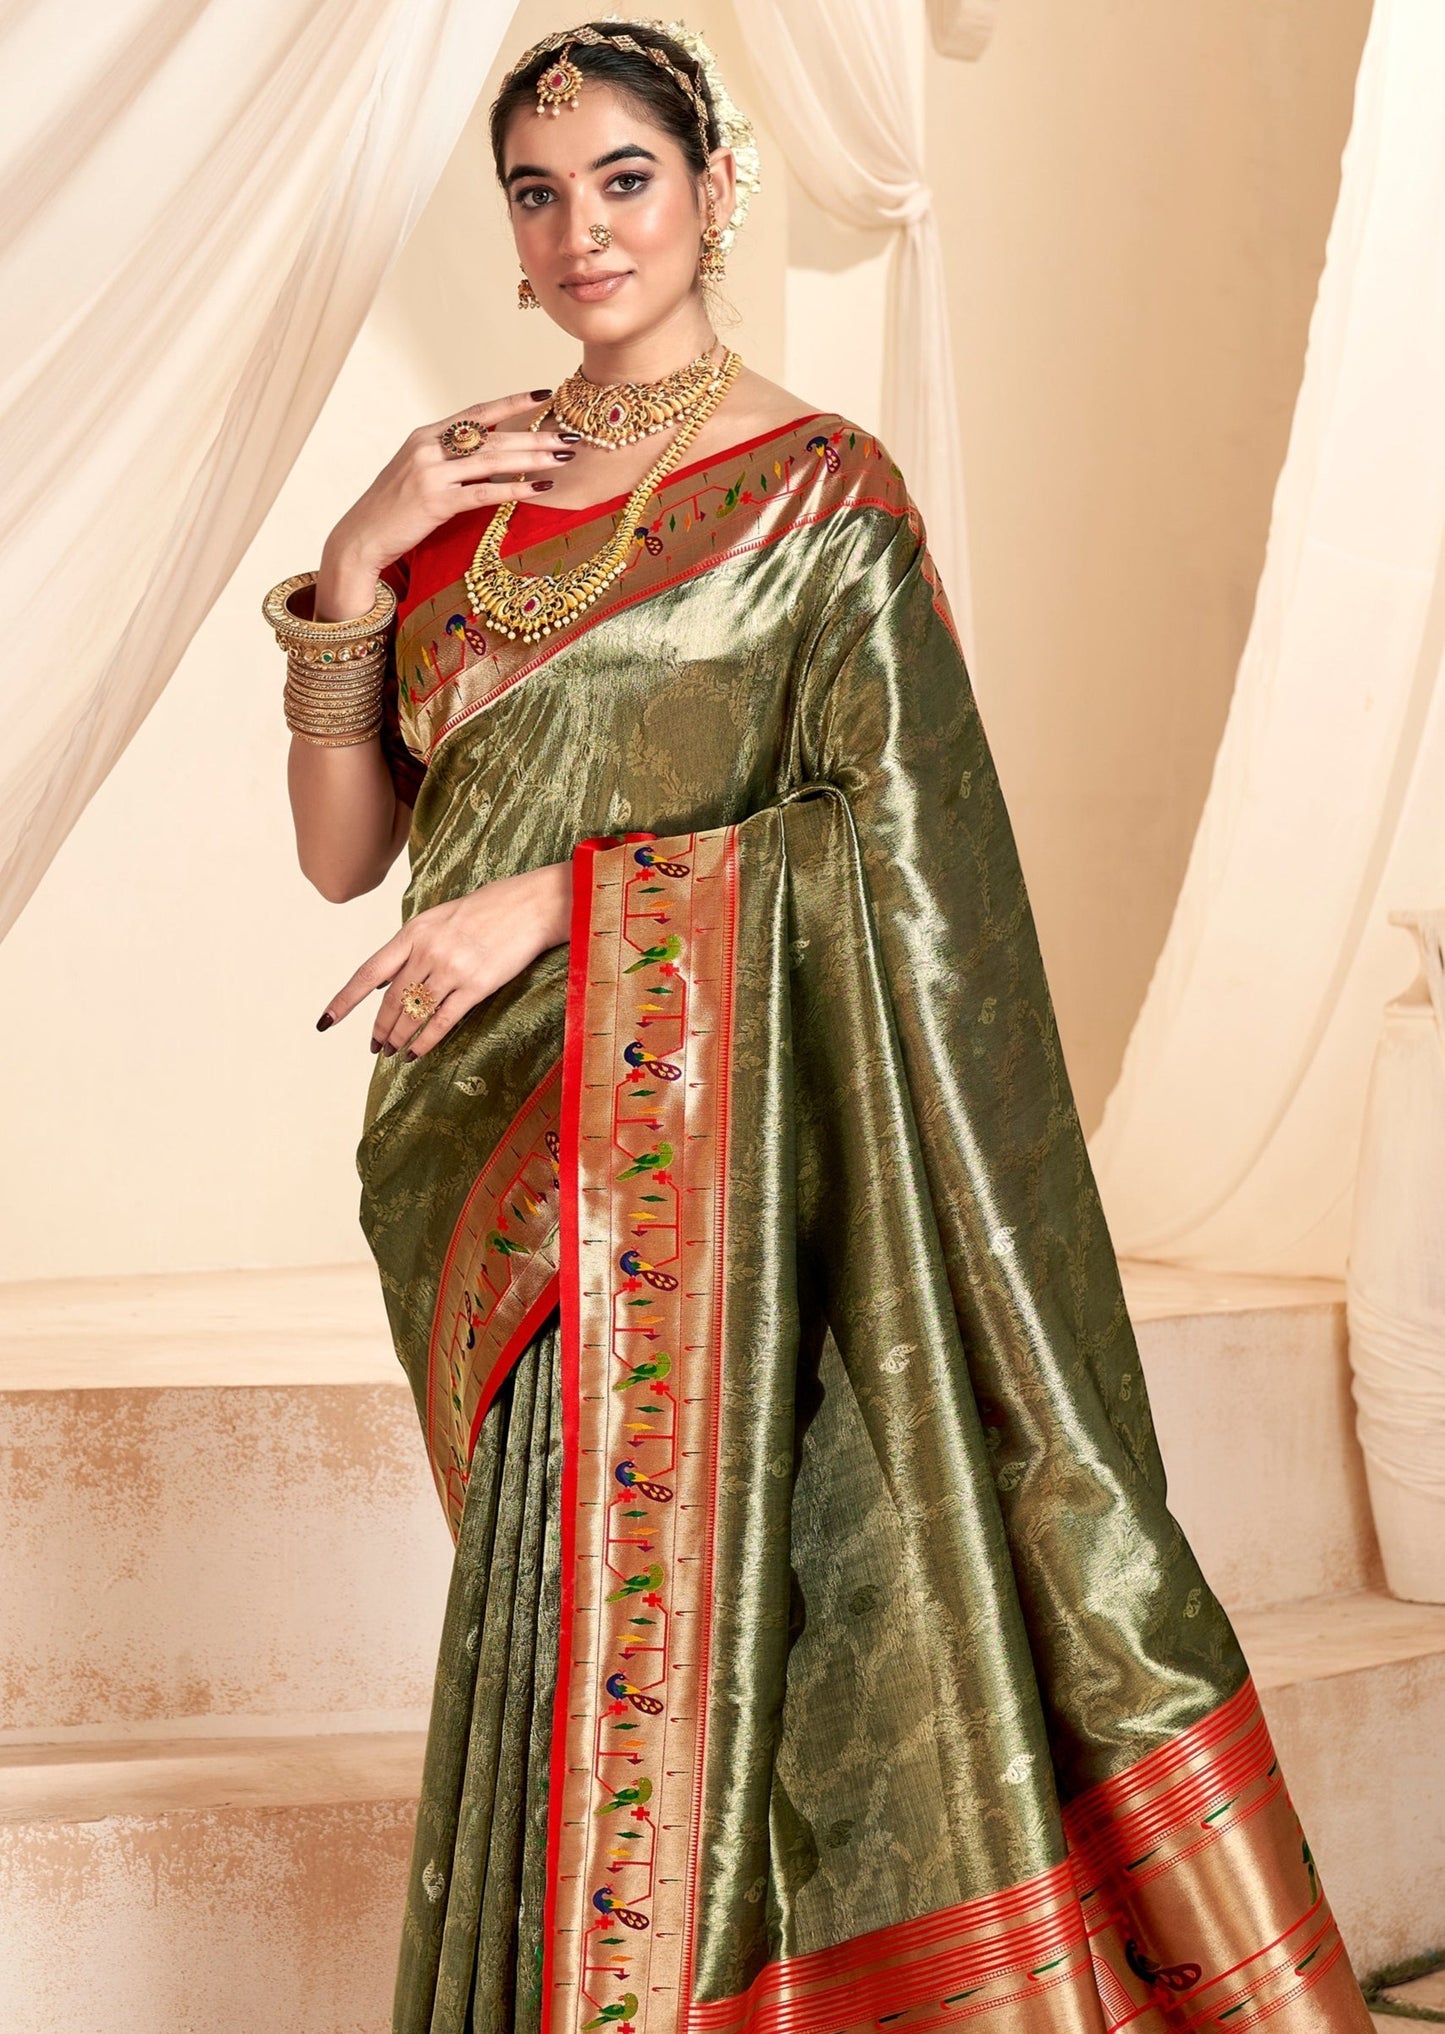 Handloom paithani tissue silk olive grey color saree online shopping in india with price for bridal wear.